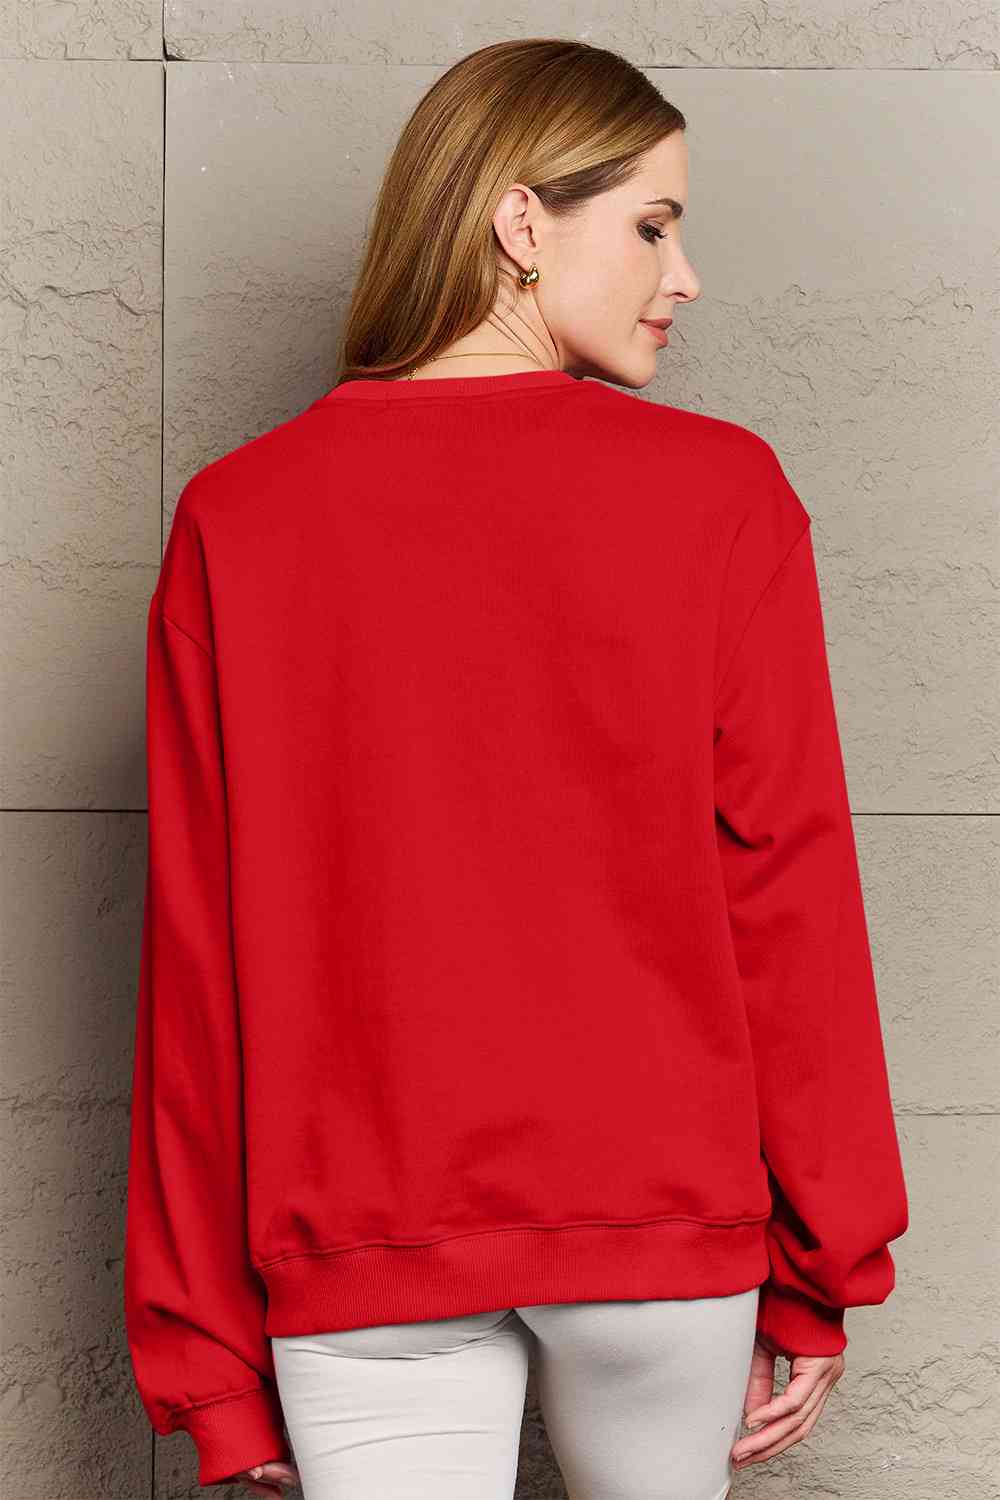 Firebrick Simply Love Full Size SLEIGHIN' IT Graphic Sweatshirt Sentient Beauty Fashions Apparel & Accessories